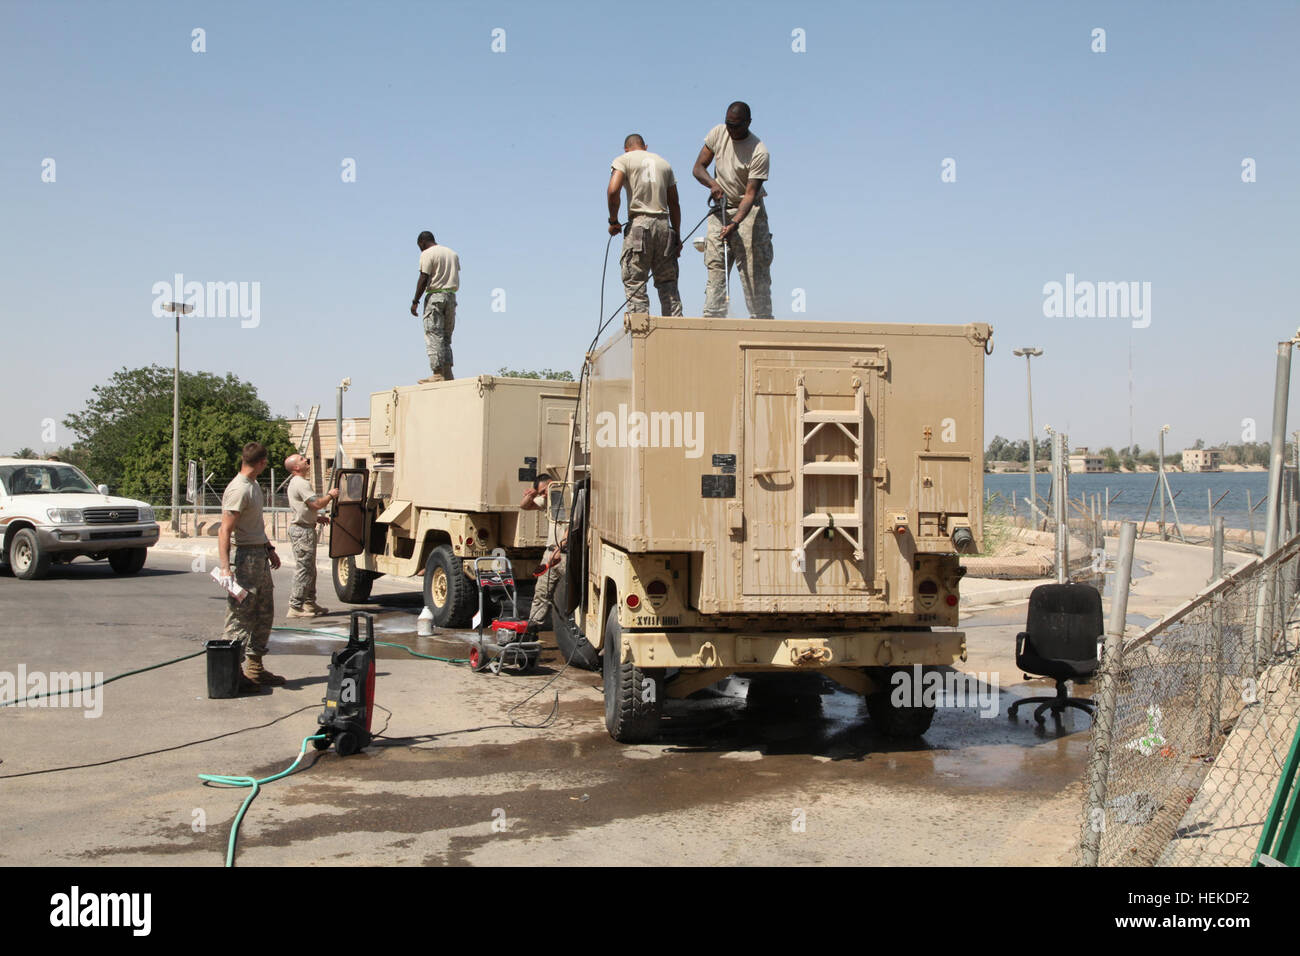 U.S. Army soldiers from the United States Forces - Iraq J2 shop clean their vehicles and equipment at Al-Faw Palace on victory Base Complex in Baghdad, Iraq, Sept. 11, 2011. The soldiers are preparing this equipment for its return to the United States as part of the draw down in support of Operation New Dawn. (U.S. Army photo by Sgt Matthew Friberg/Released) Troops clean vehicles on Victory Base Complex 110911-A-JL274-026 Stock Photo